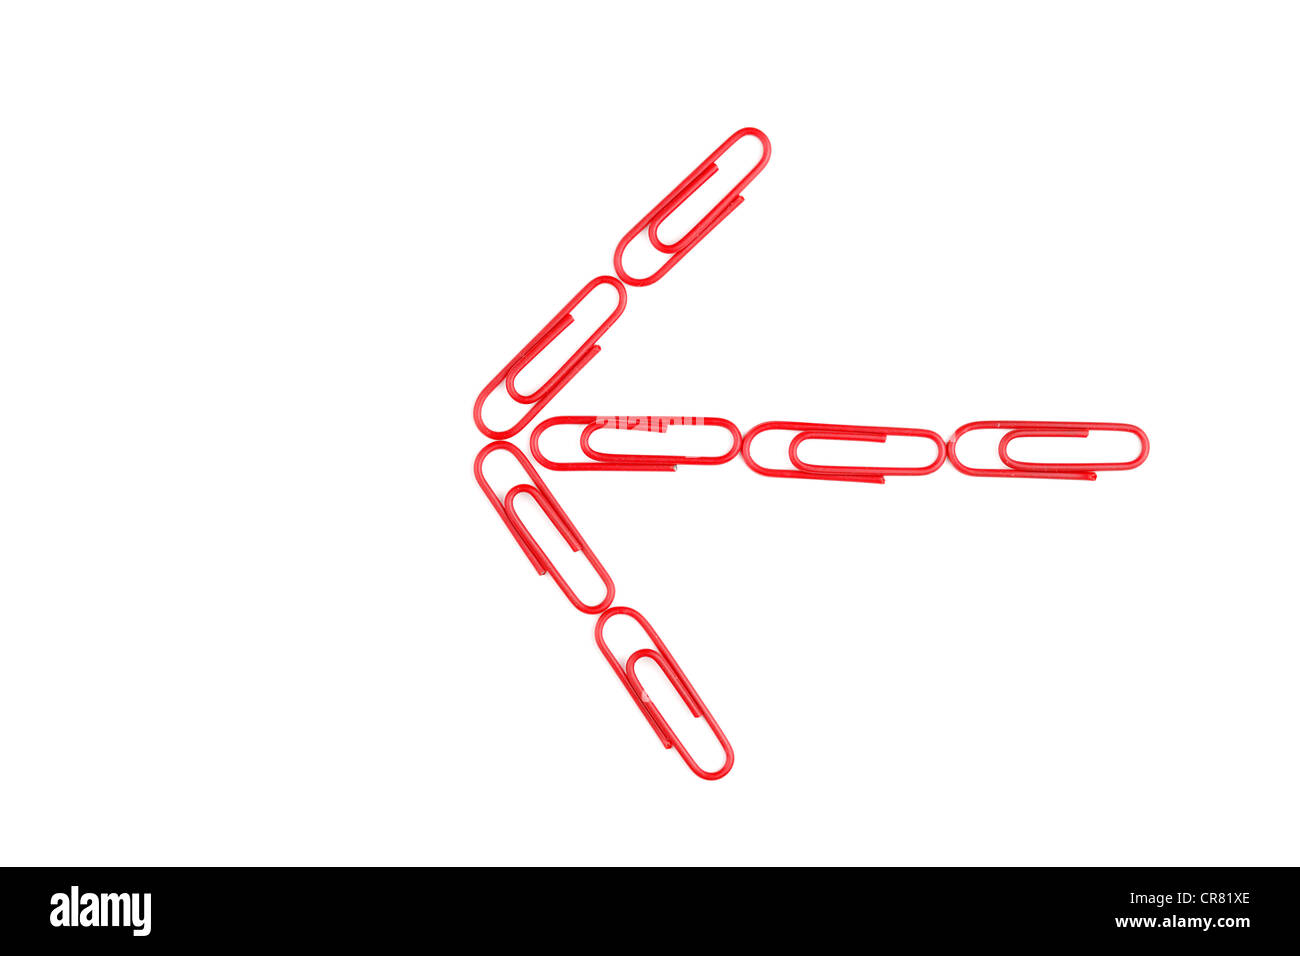 Arrow made of red paper clips, symbolic image for giving direction Stock Photo